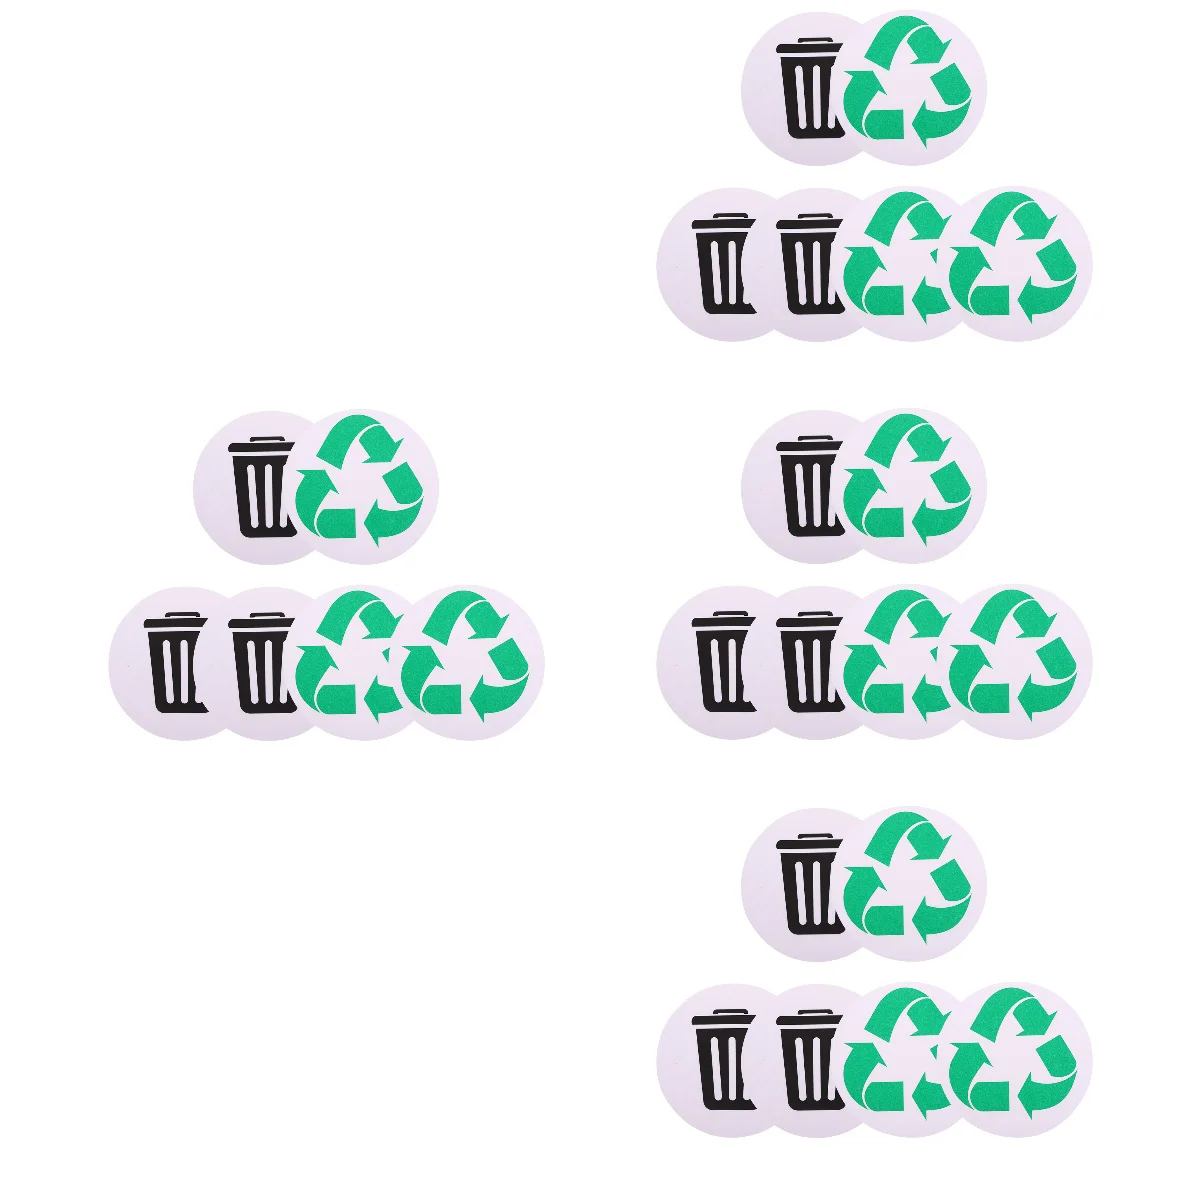 

24 Pcs Garbage Sorting Stickers Trash Recycling Recycle for Can Label Adhesive Pvc Waste Container Bins